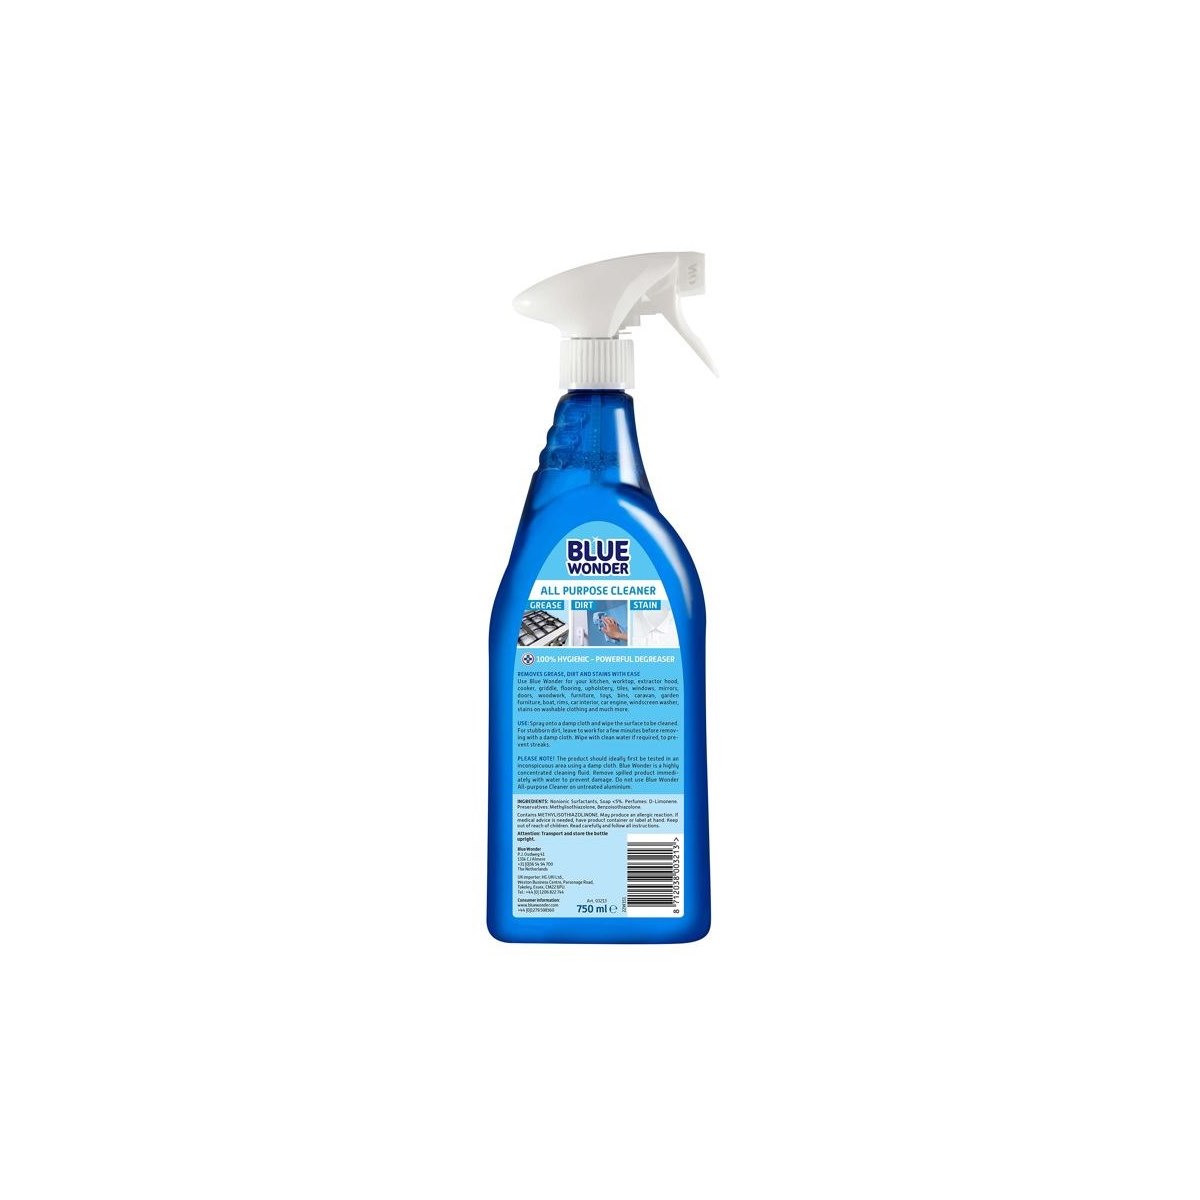 How to use How to Use Blue Wonder All Purpose Cleaner 100% Hygienic